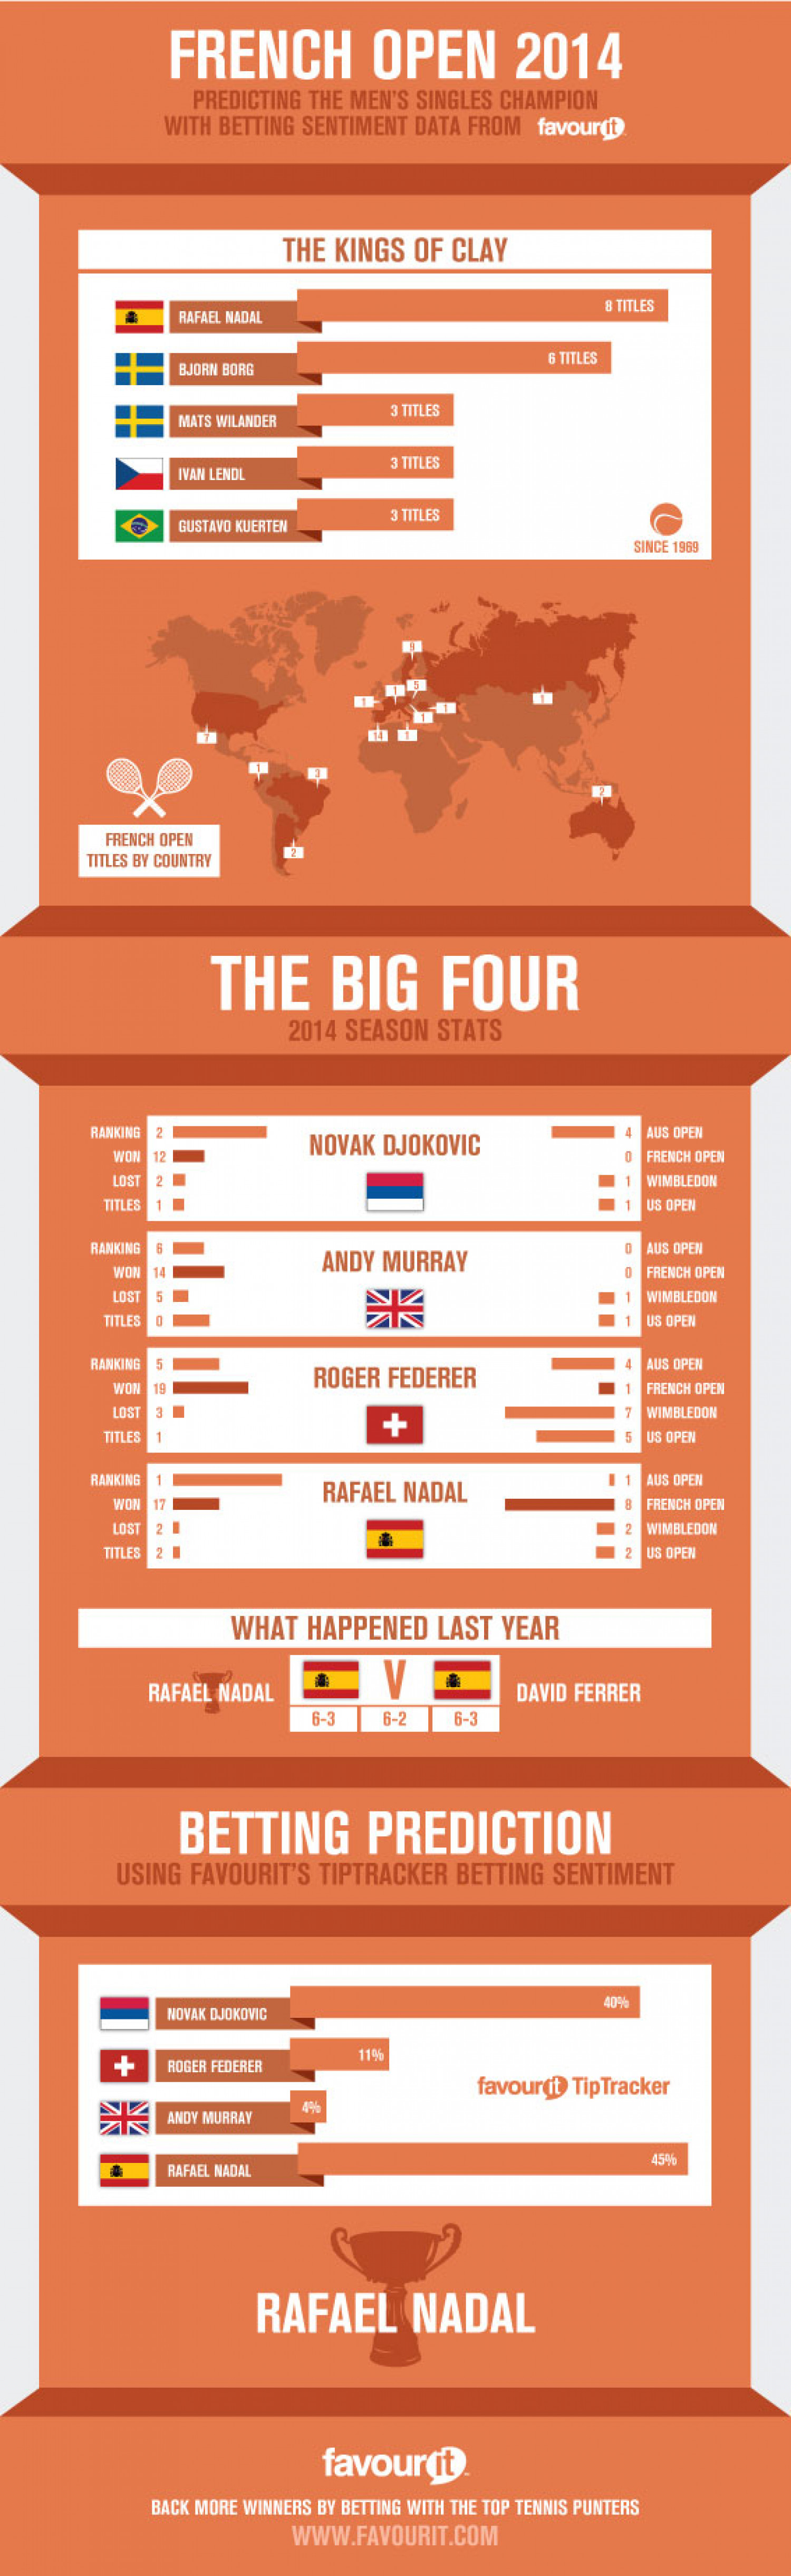 2014 French Open Predictions & Betting Tips Infographic